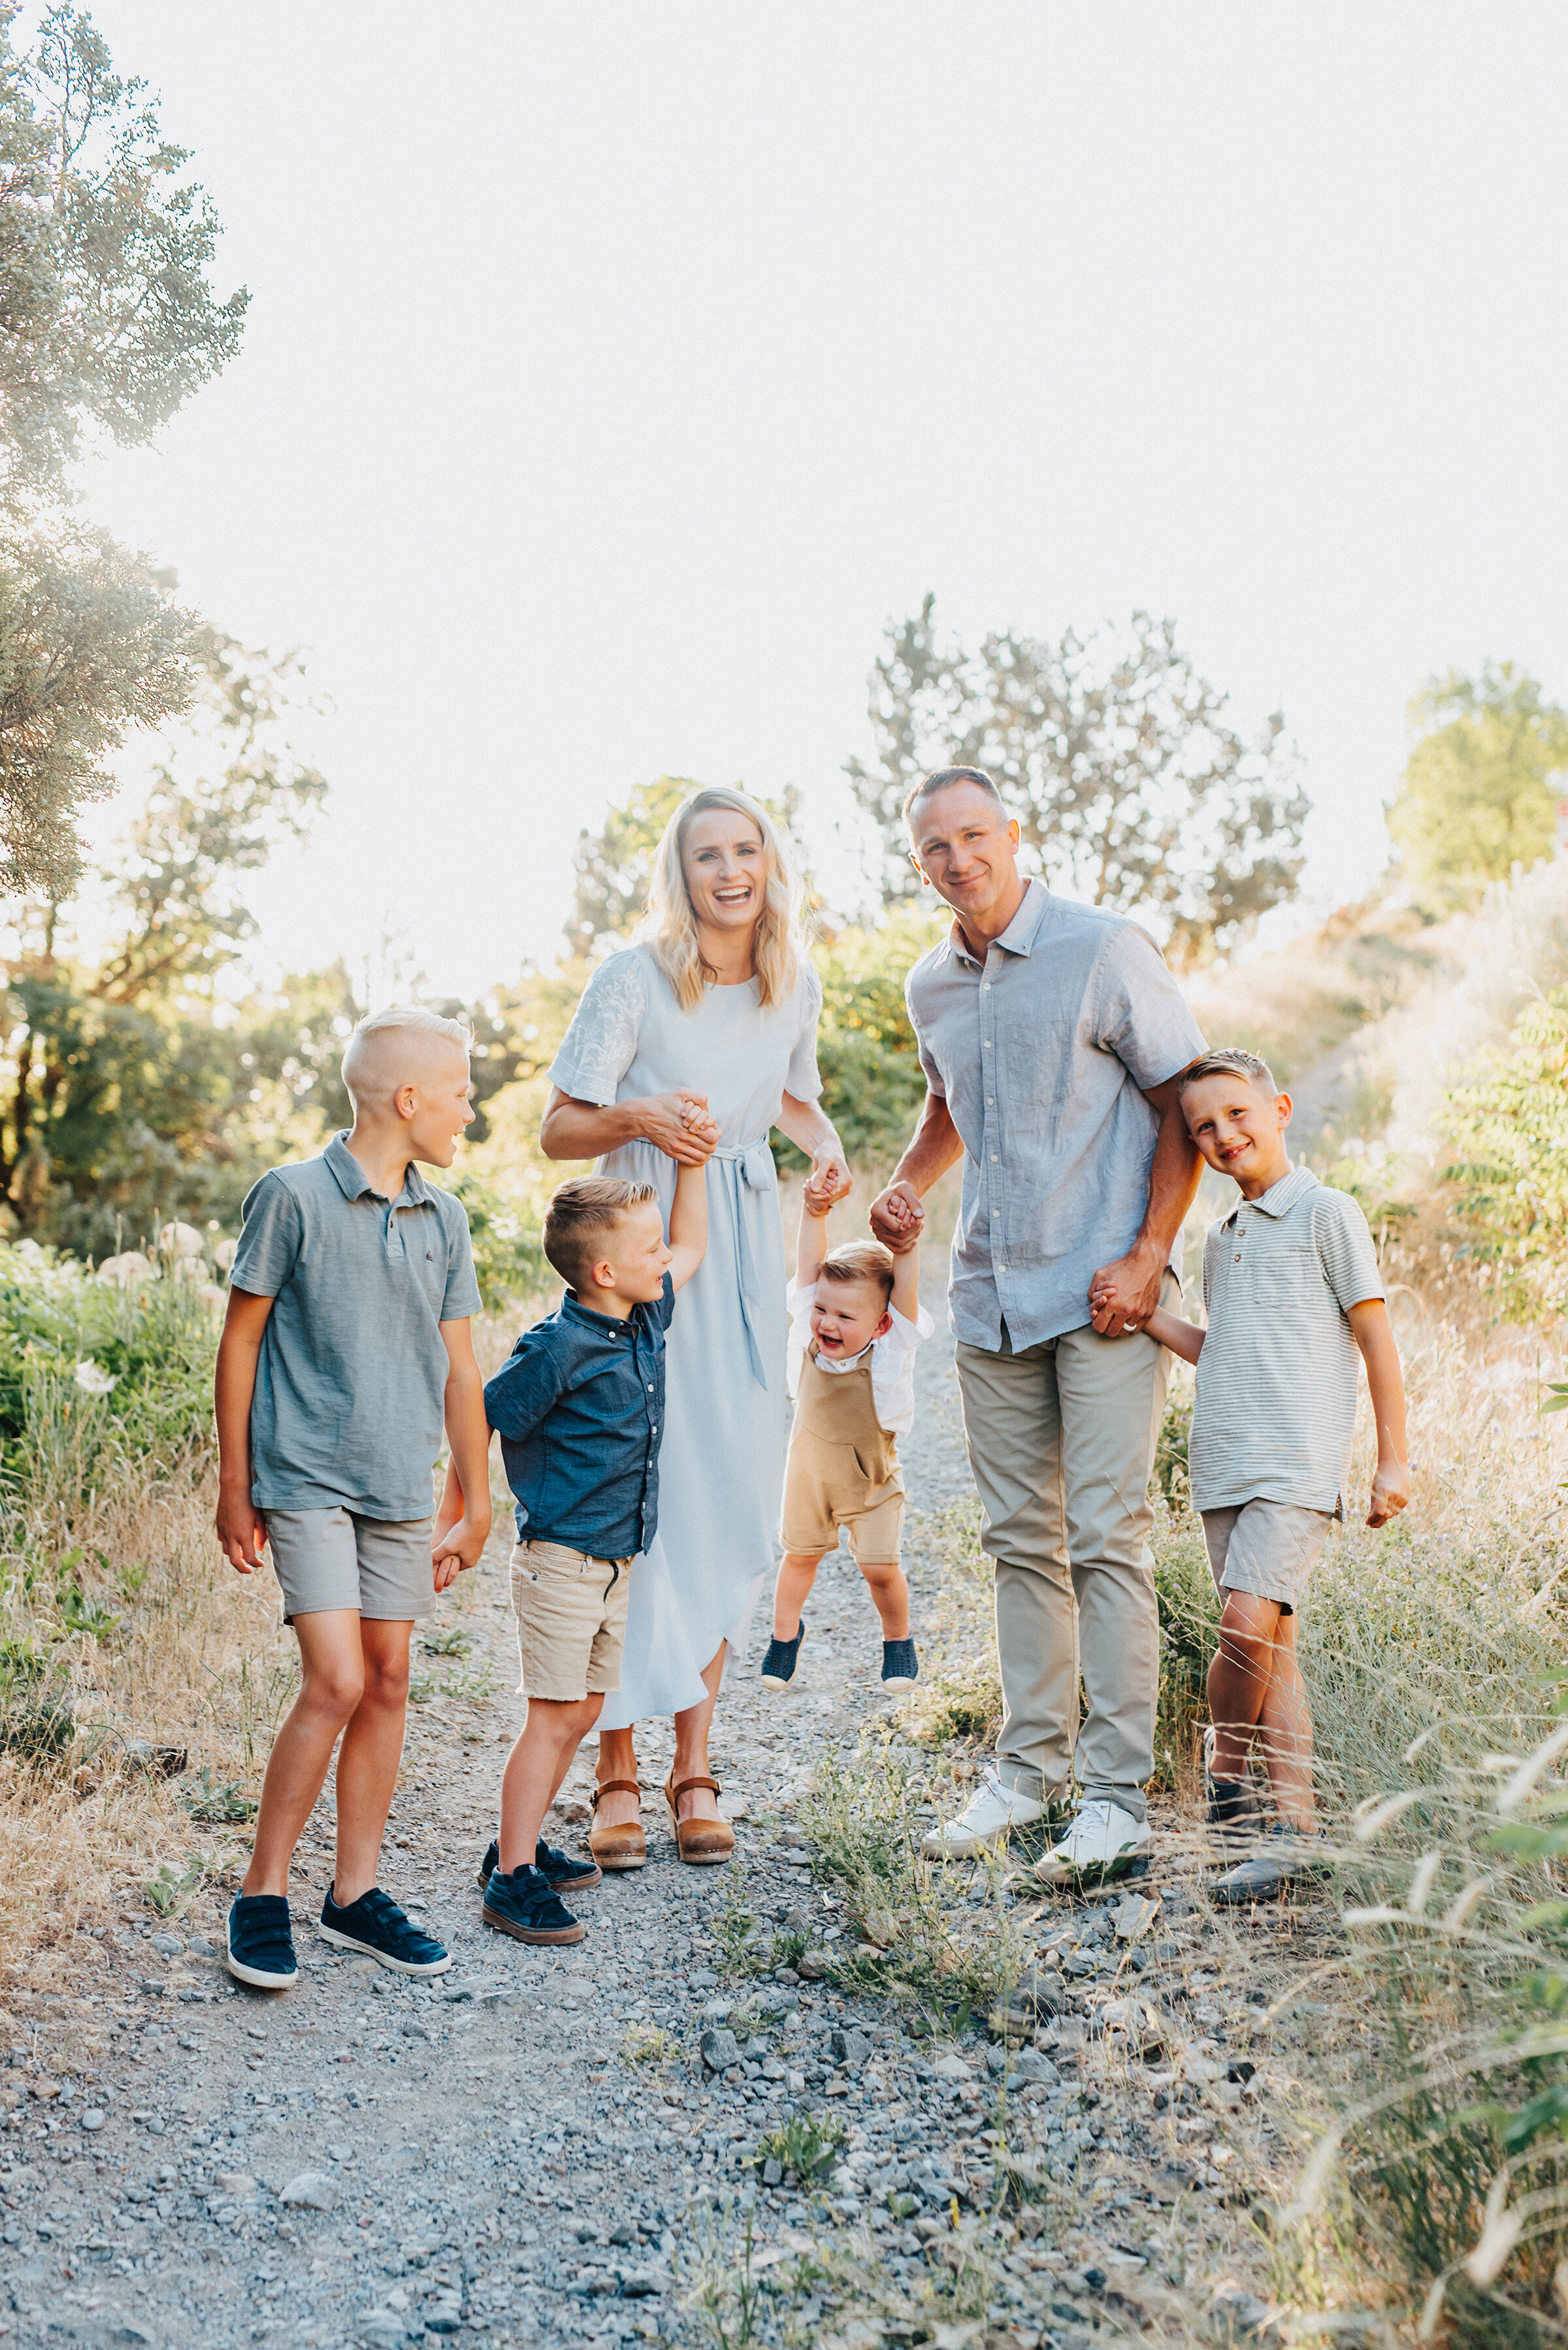  An adorable smiling family of six are holding hands while walking down a trodden footpath in Providence Canyon, UT. Light blue and khakis soft outdoor setting family photoshoot backlit sunlight in utah dessert #providencecanyon #utahphotography #utah #familyphoto #family #familyphotography #familyphotographer #photography #love #familytime #photooftheday #familyphotos #photographer #familylove 